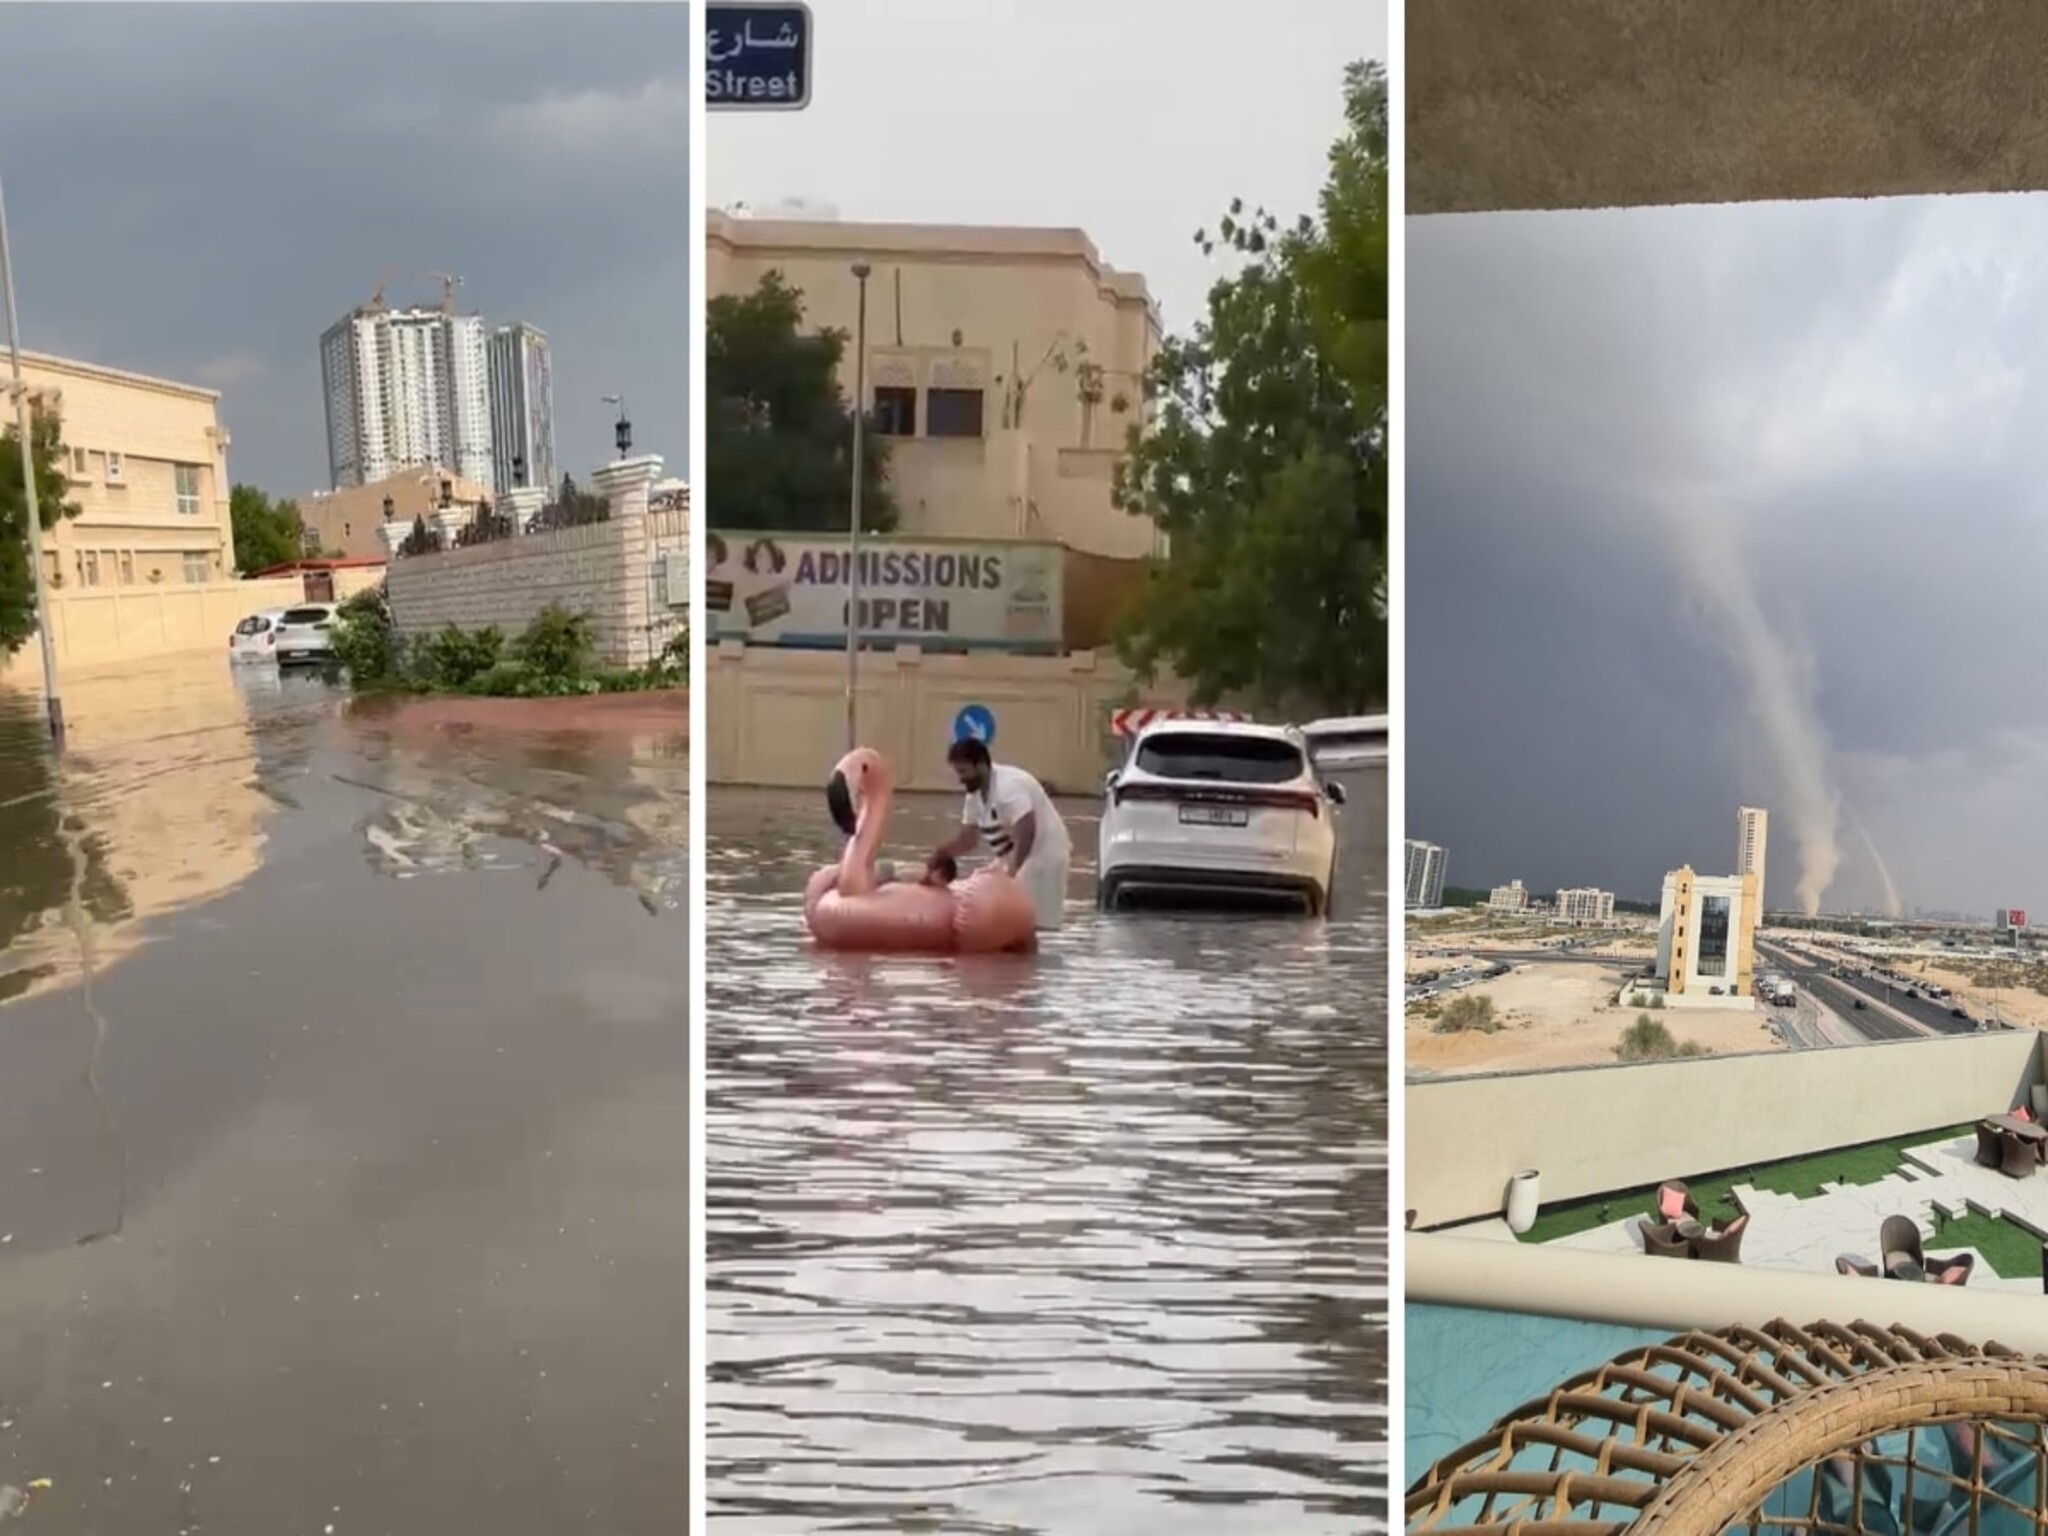 The UAE calls on residents of some areas to take necessary precautions due to heavy rain